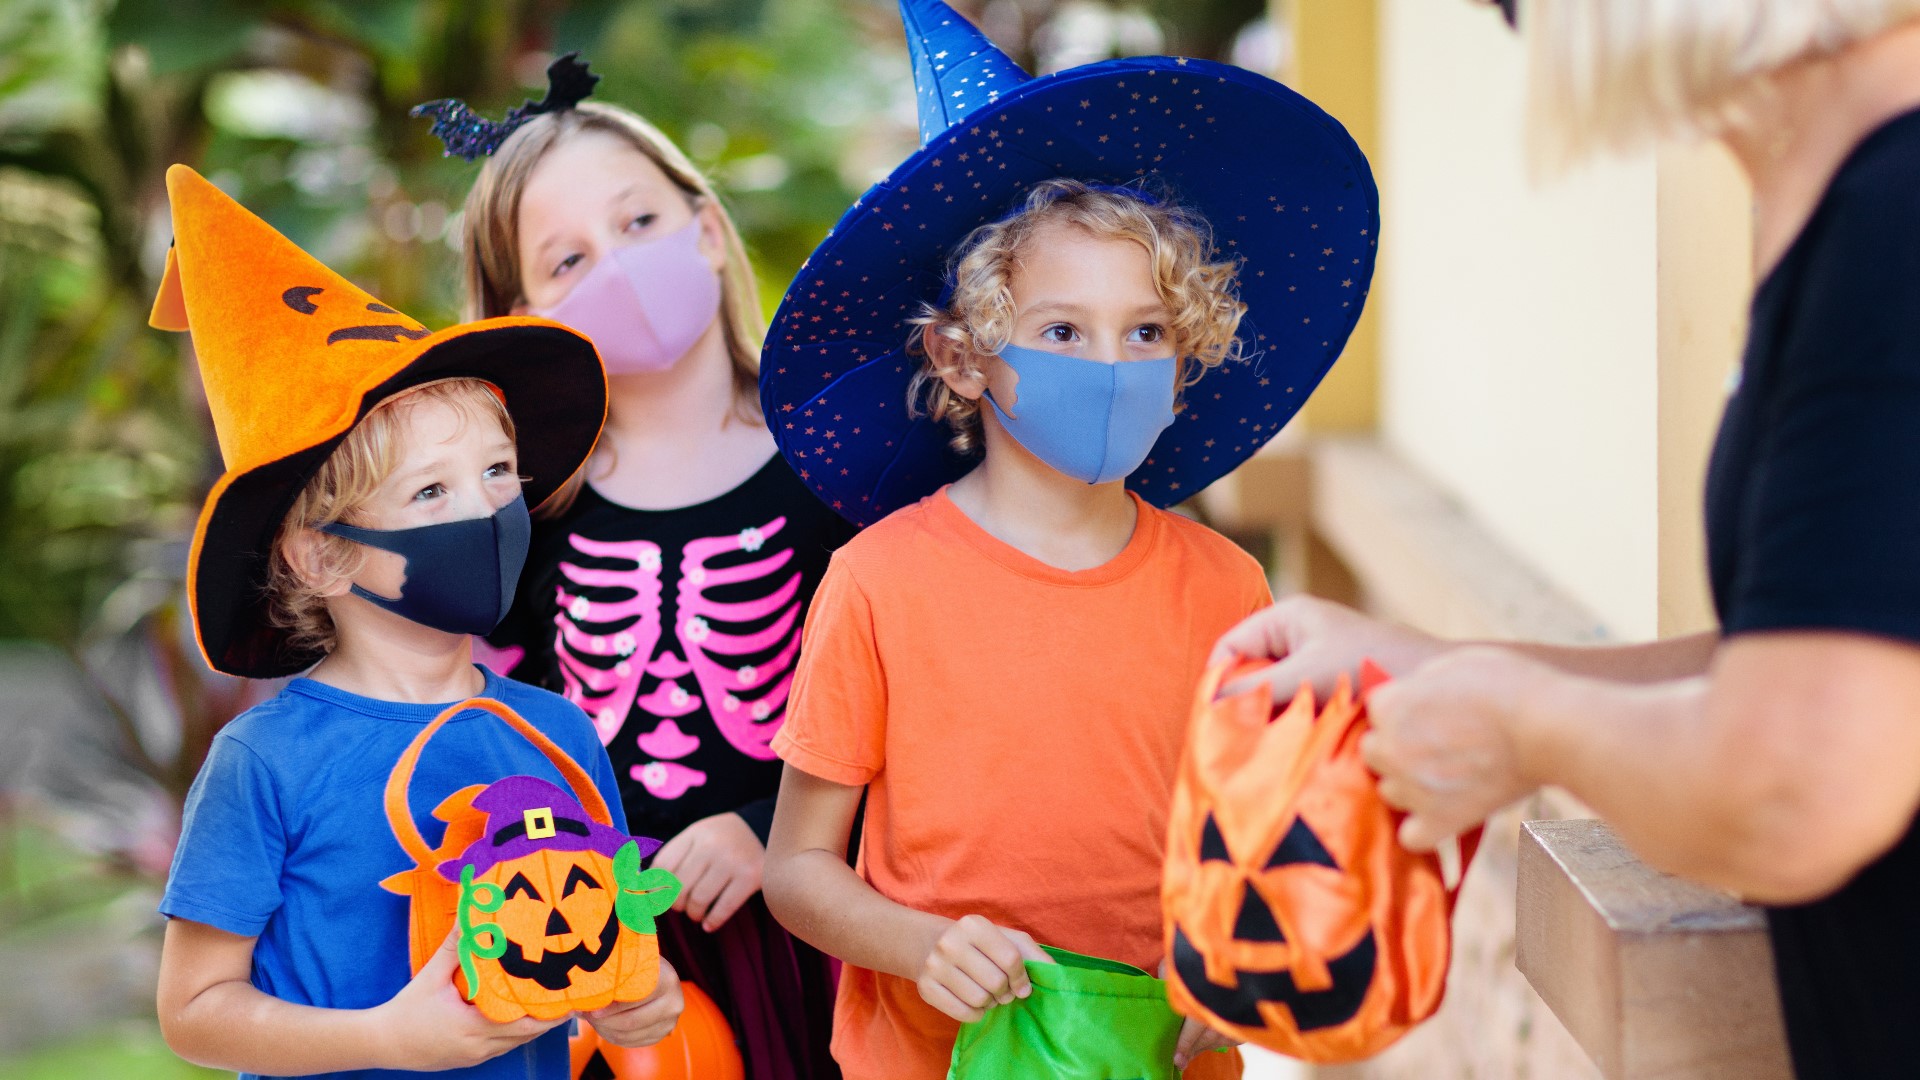 Halloween events around the Tampa Bay area